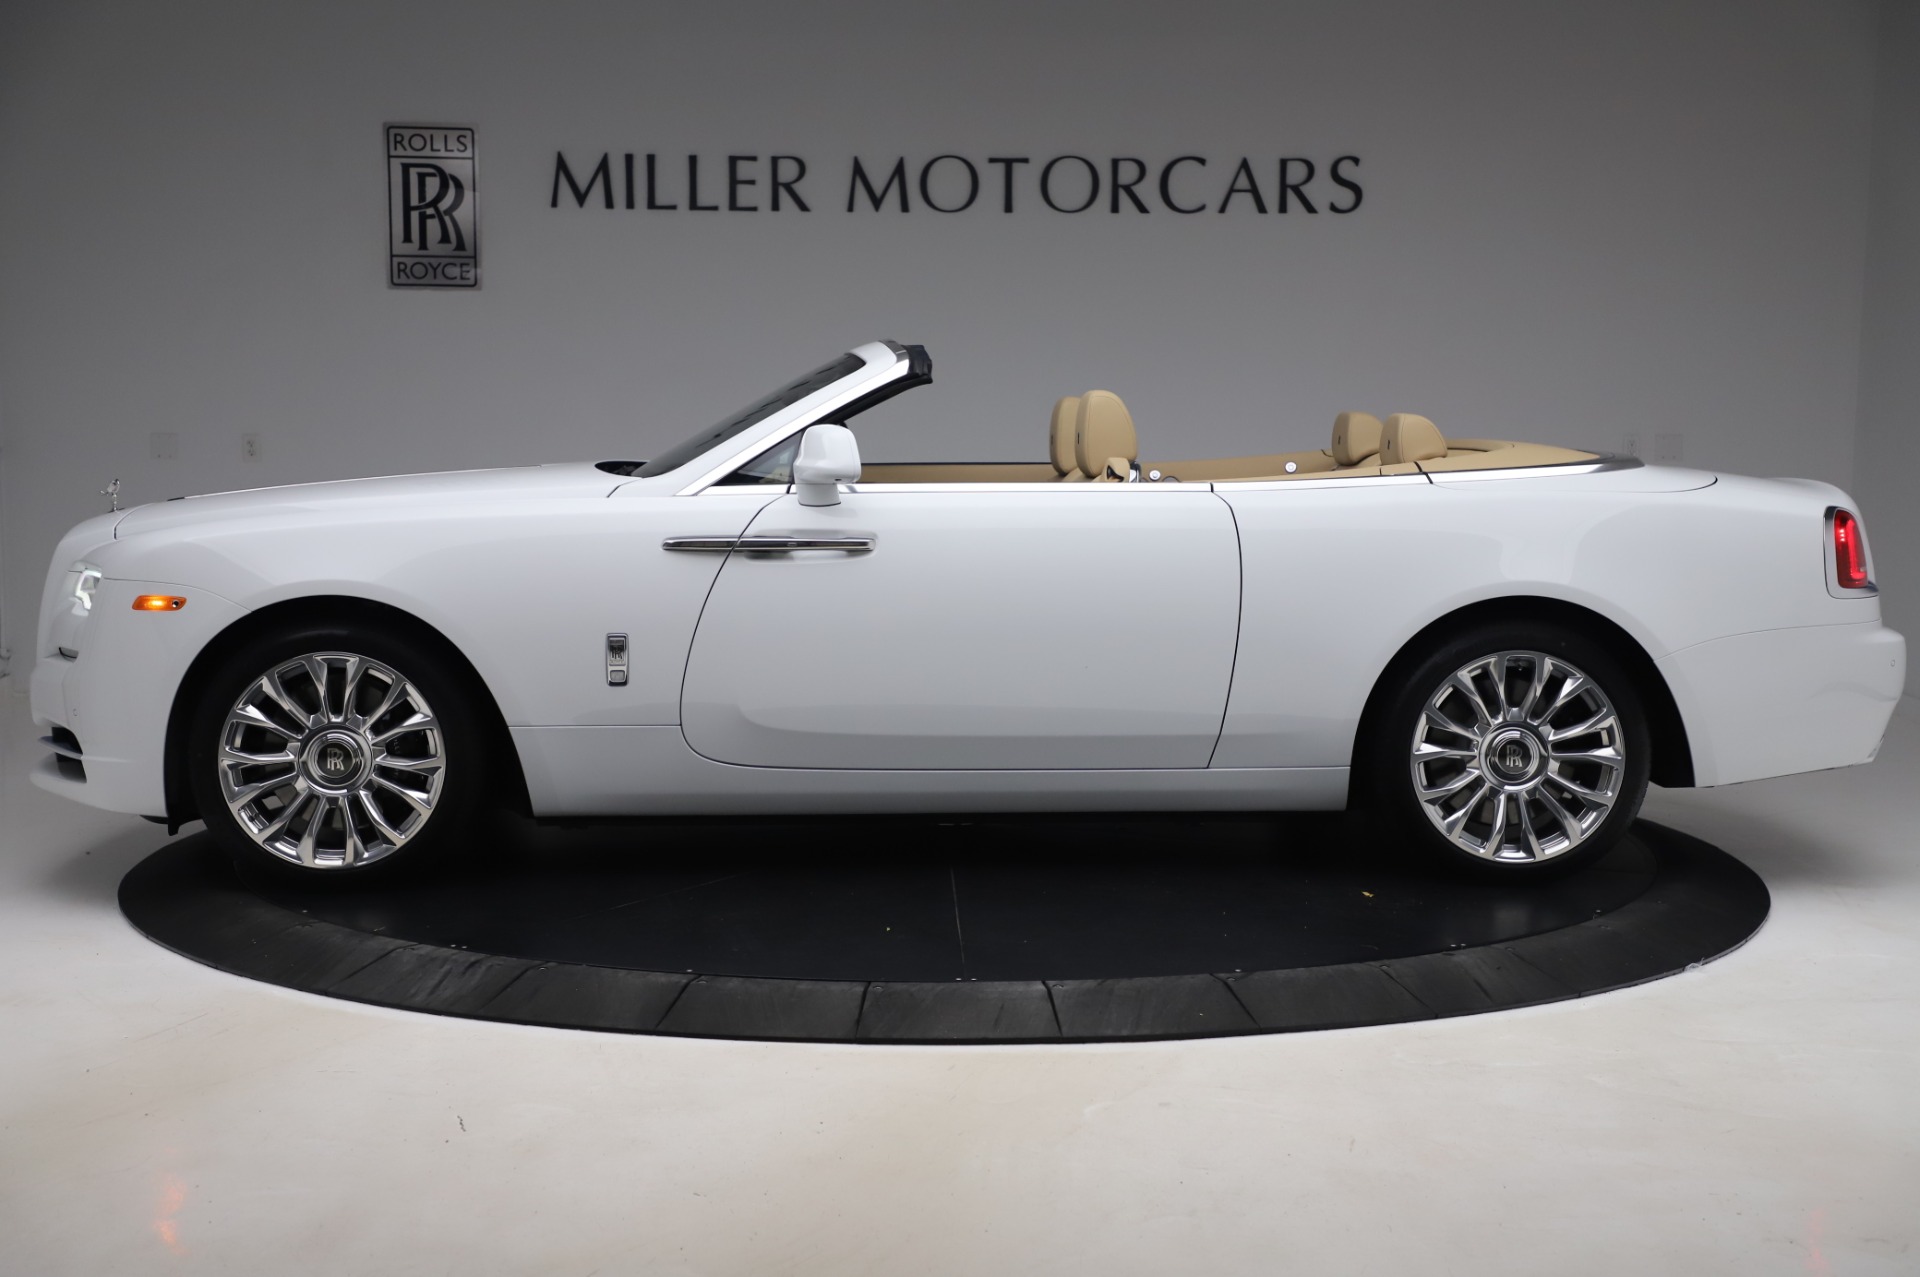 2020 RollsRoyce Dawn Convertible Latest Prices Reviews Specs Photos  and Incentives  Autoblog